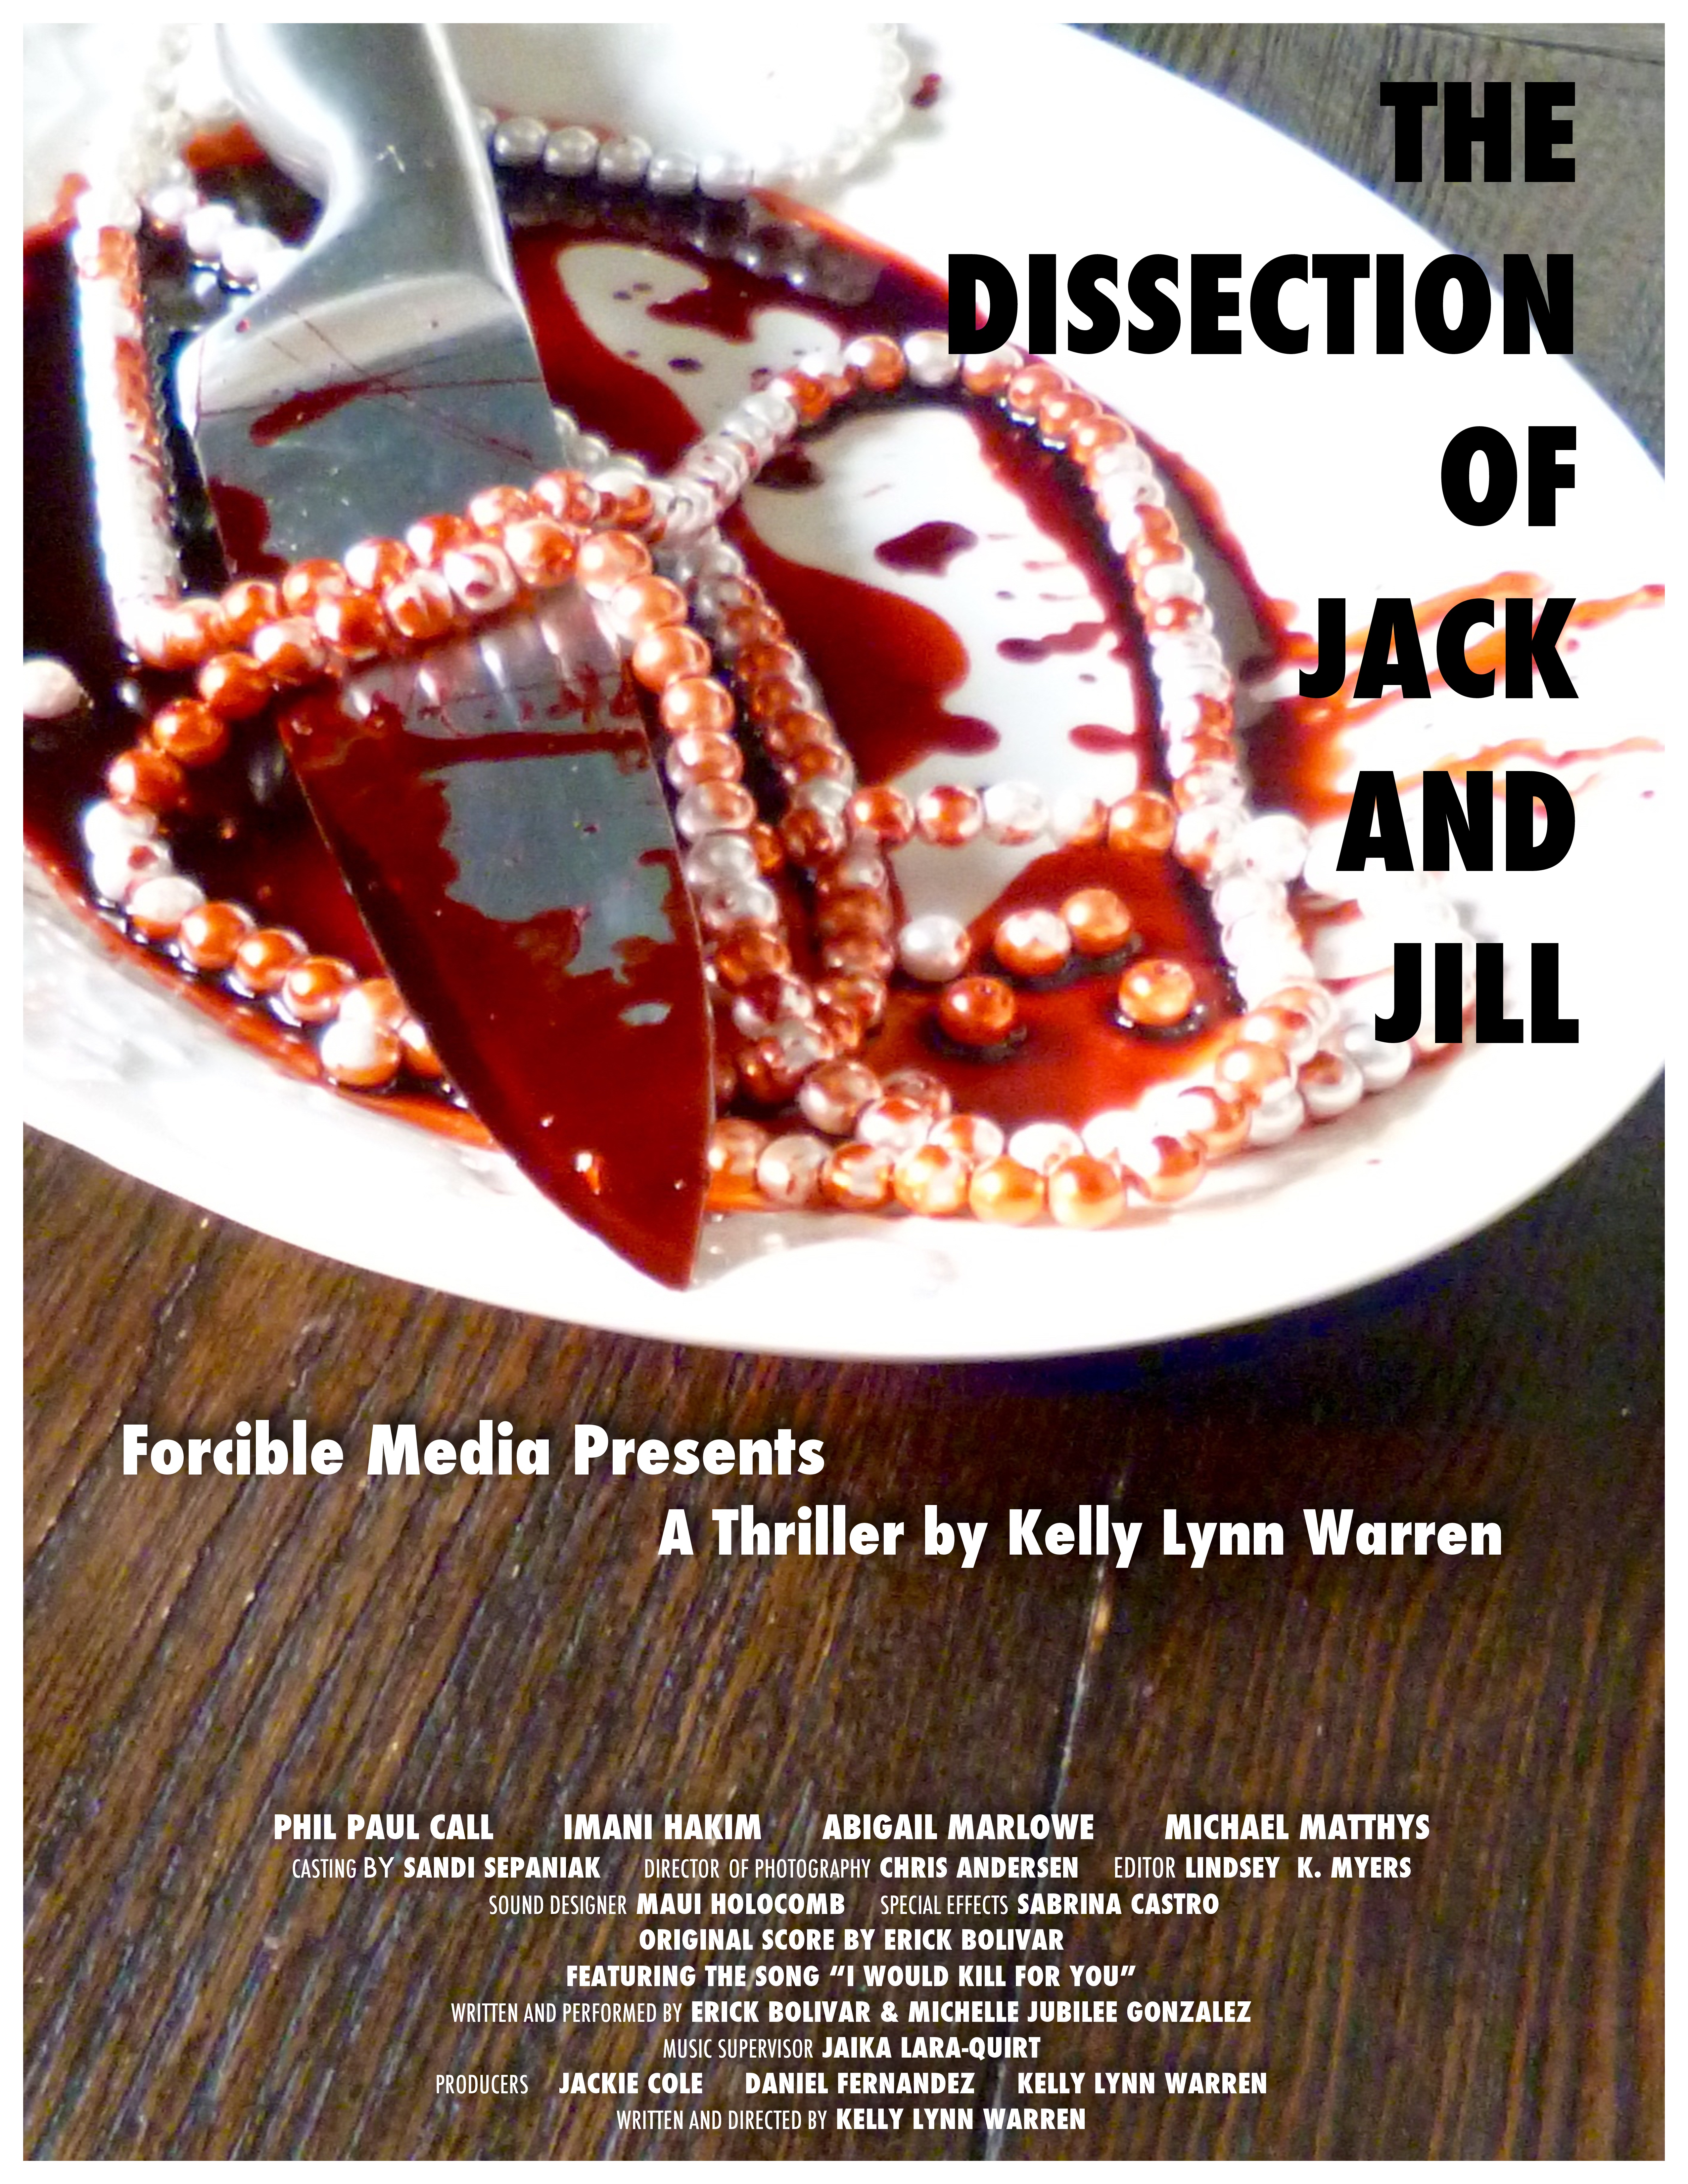 The Dissection of Jack & Jill